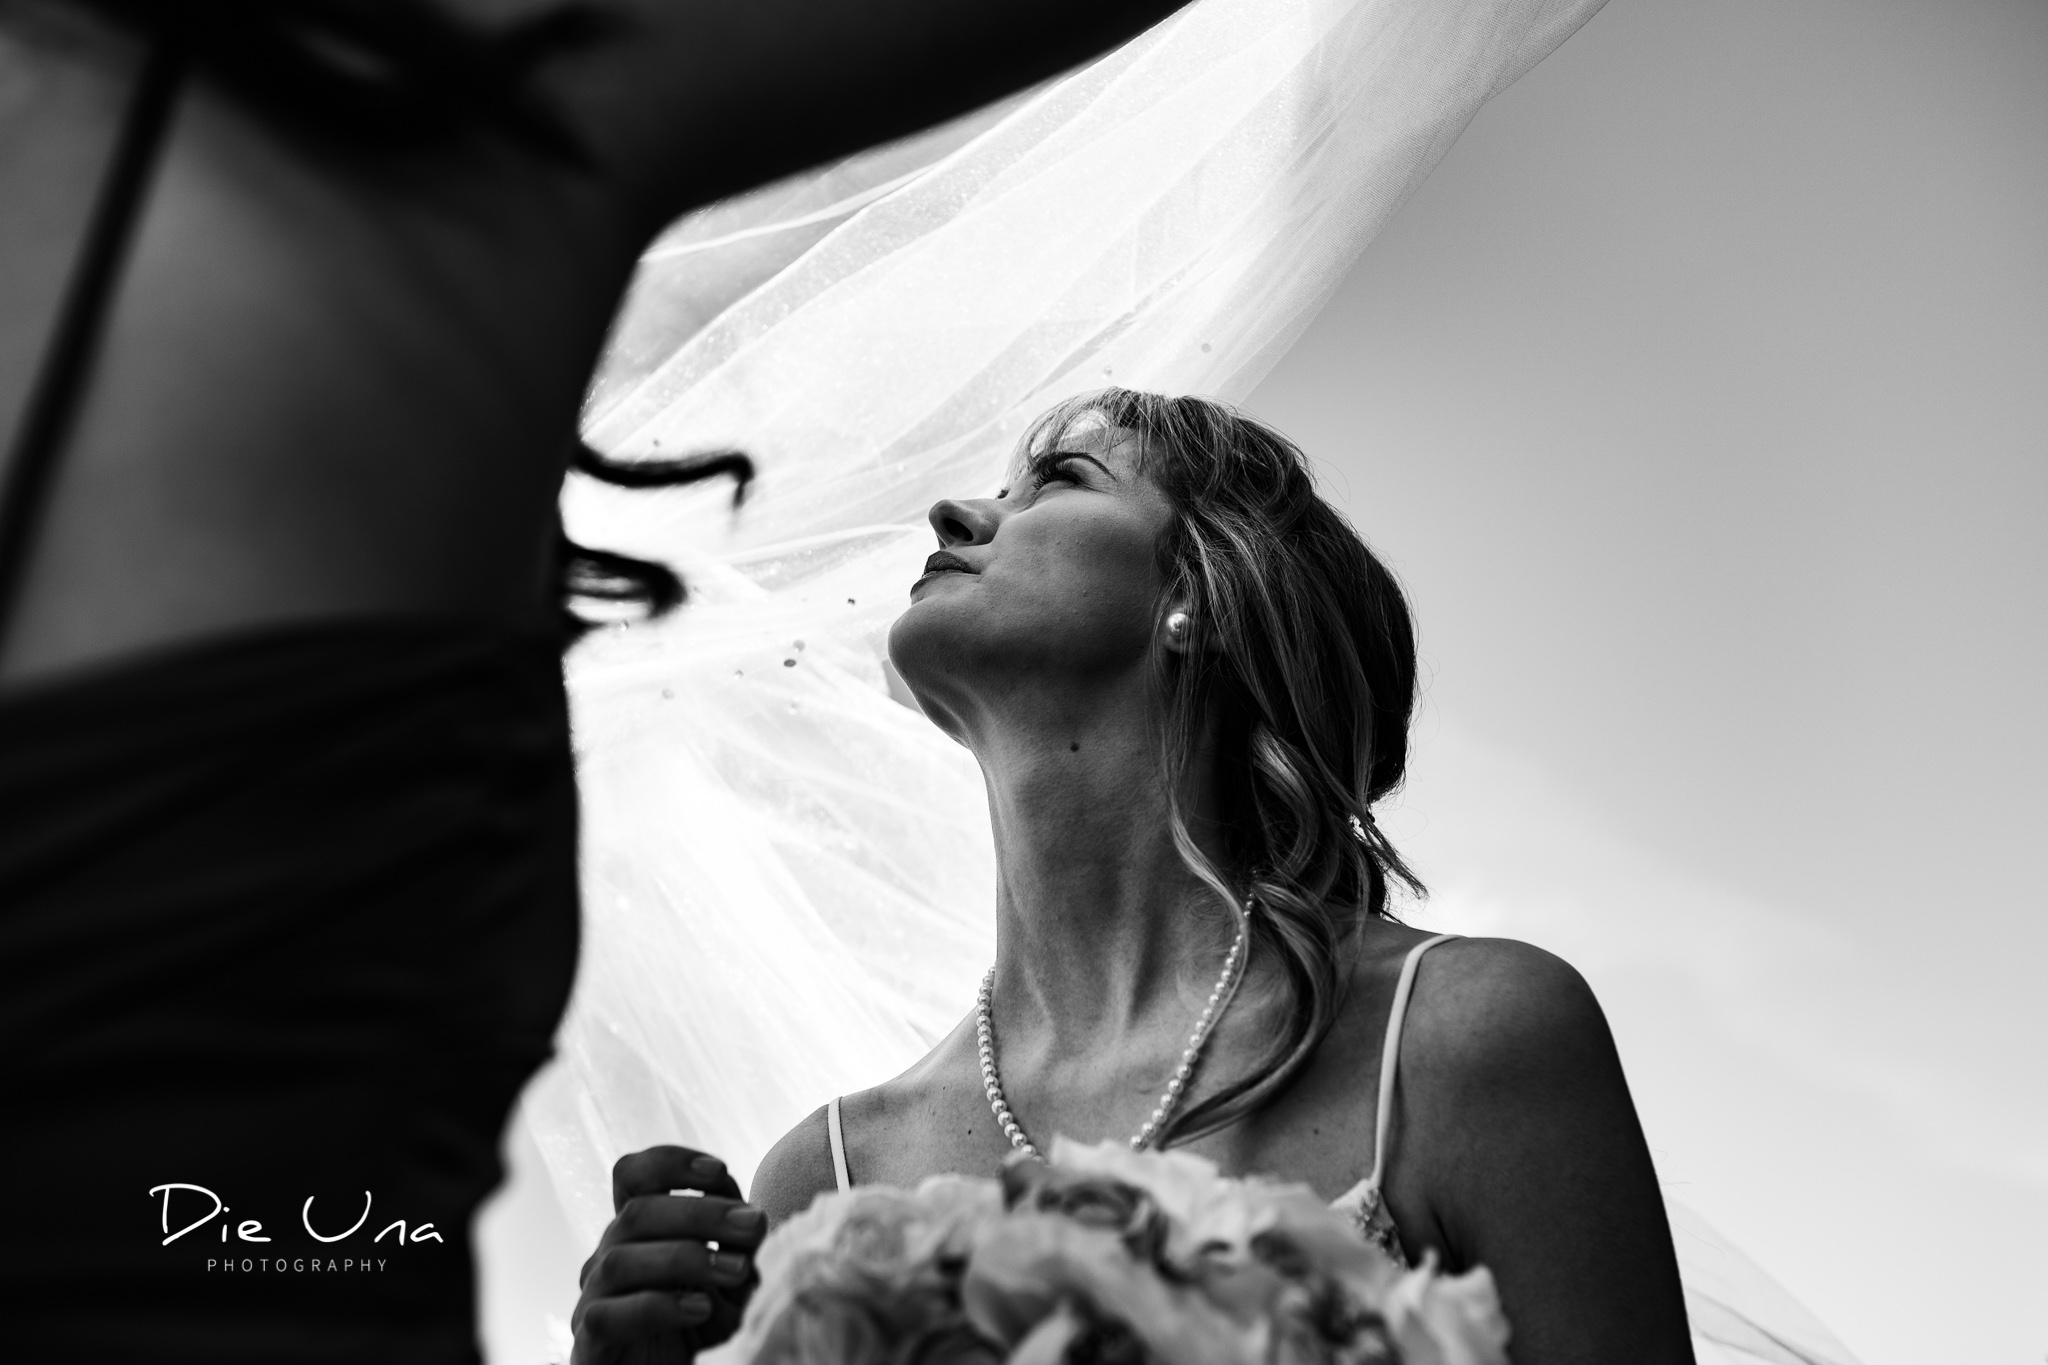 wedding veil getting blown away by wind black and white wedding photography.jpg